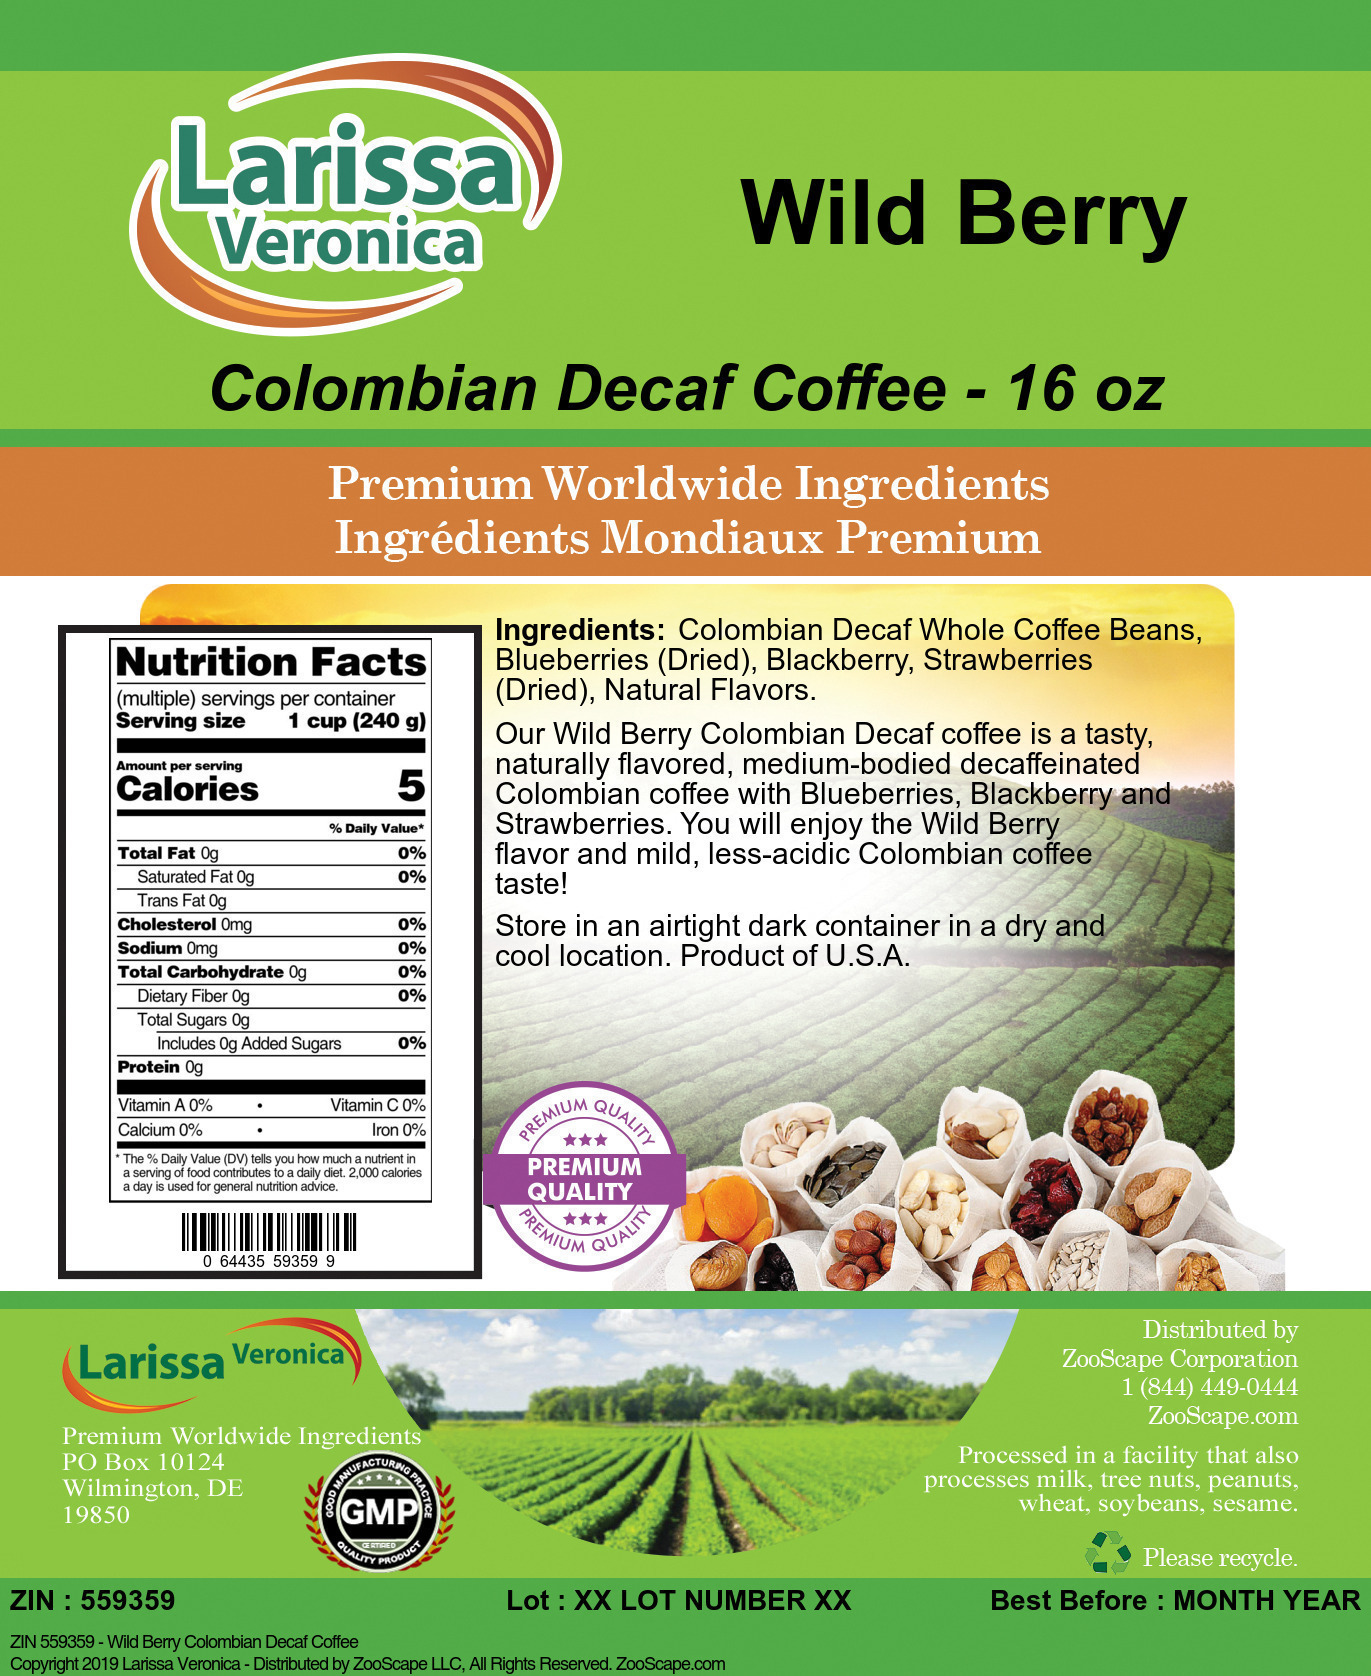 Wild Berry Colombian Decaf Coffee - Label